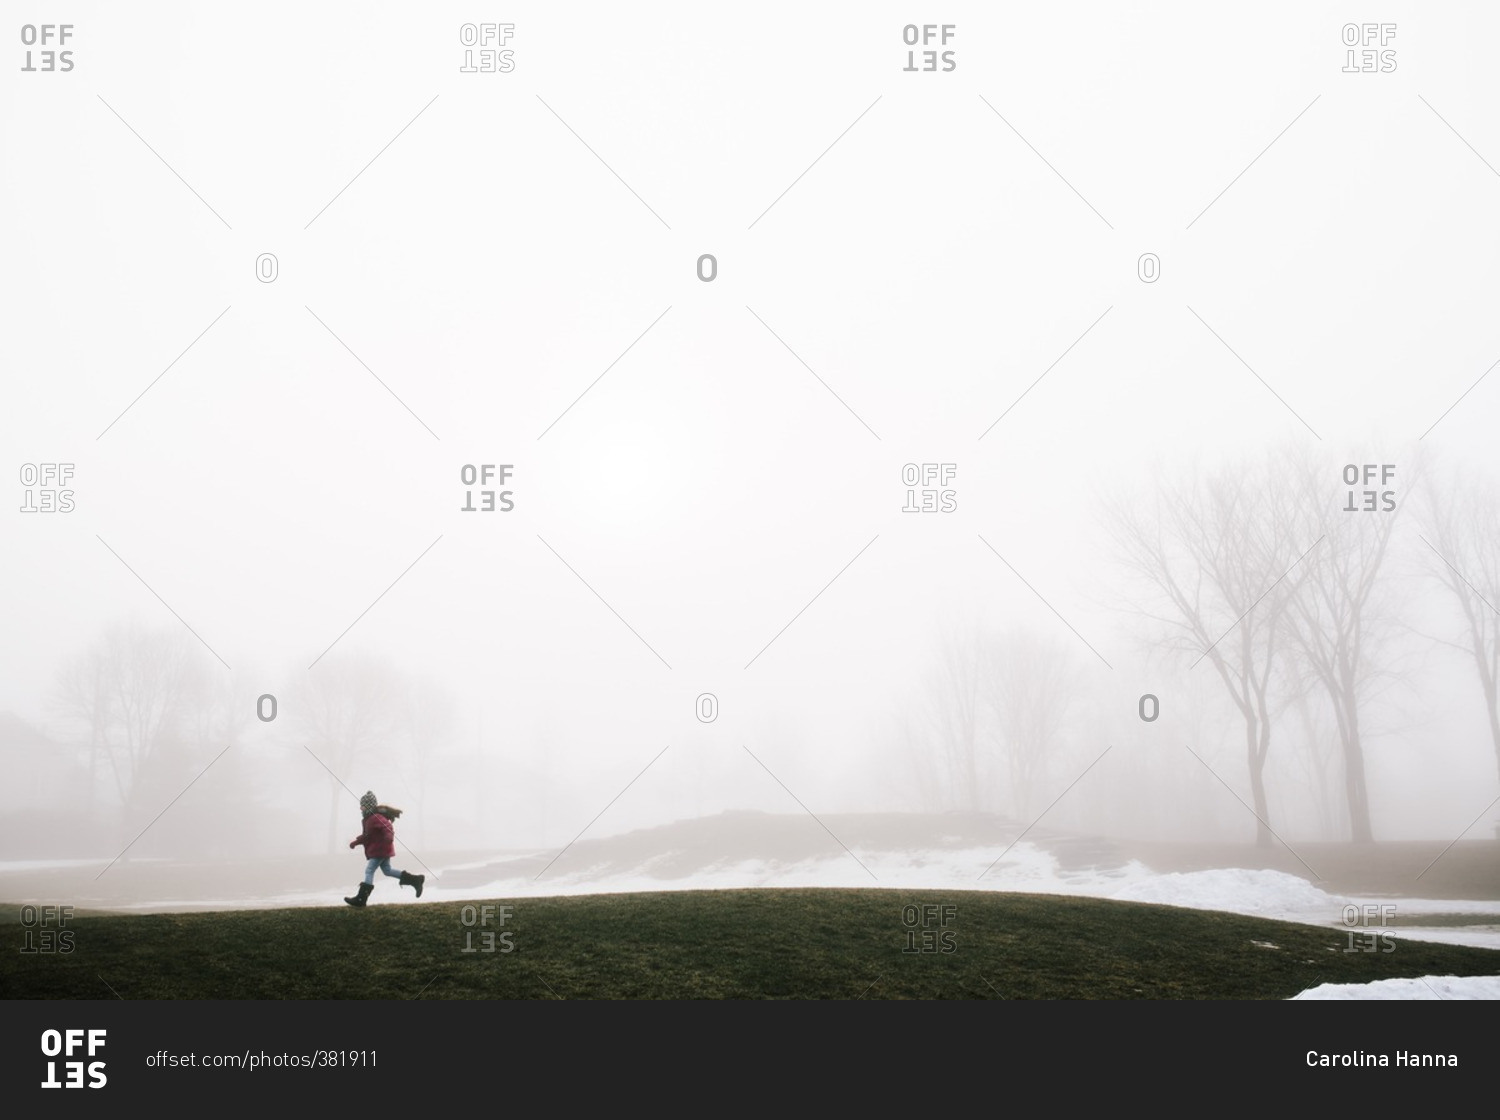 Girl walking across a field on a cold, foggy day